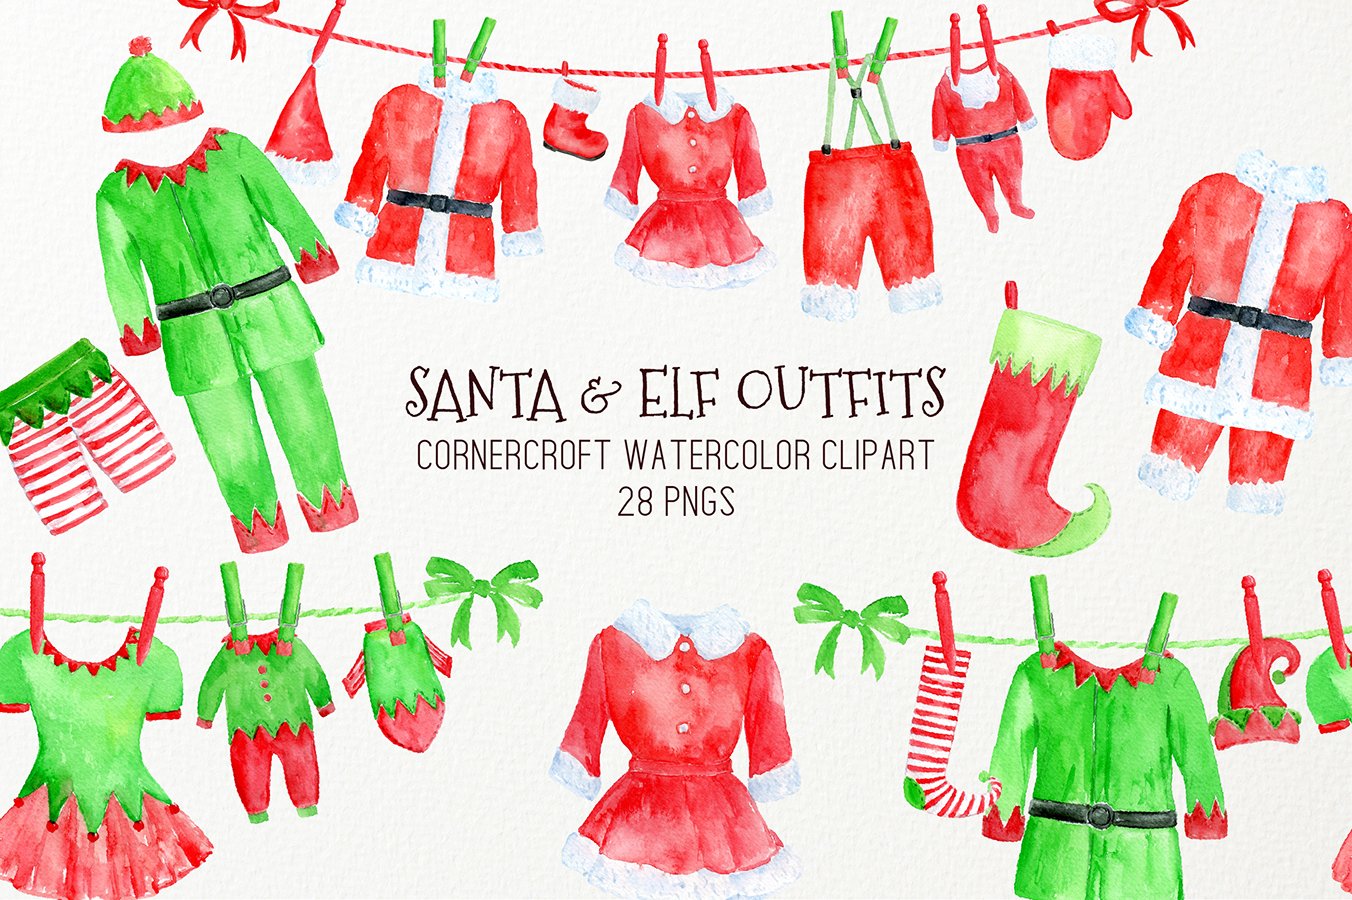 Glove clipart elf clothes. Watercolor christmas santa outfit